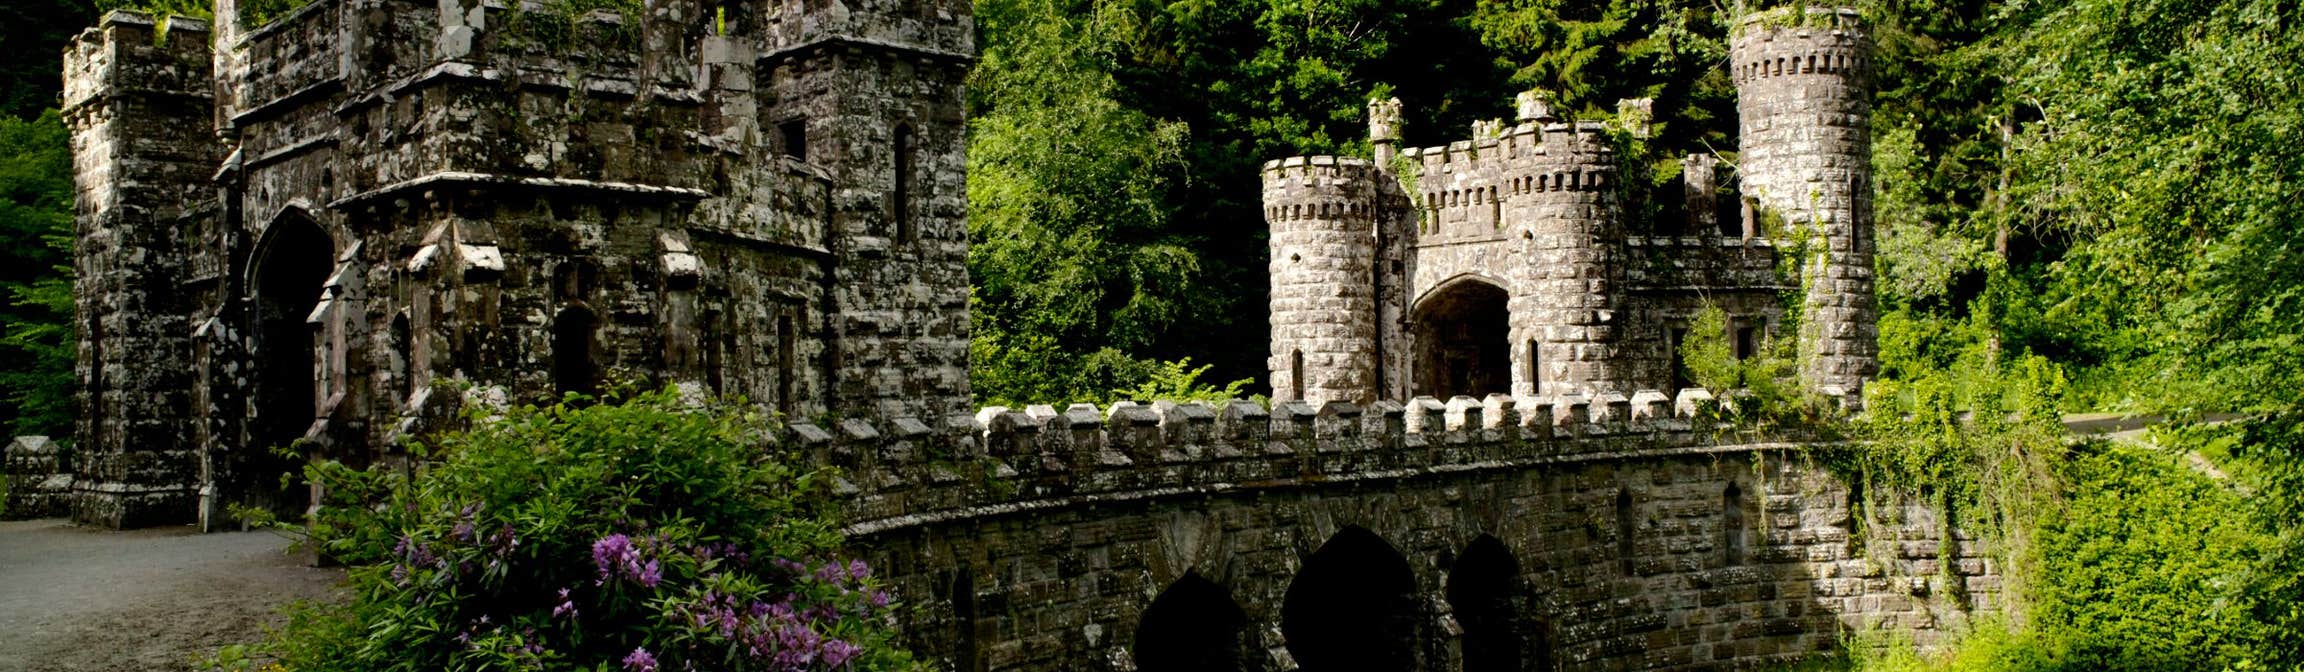 Image of Ballysaggart Towers in County Waterford